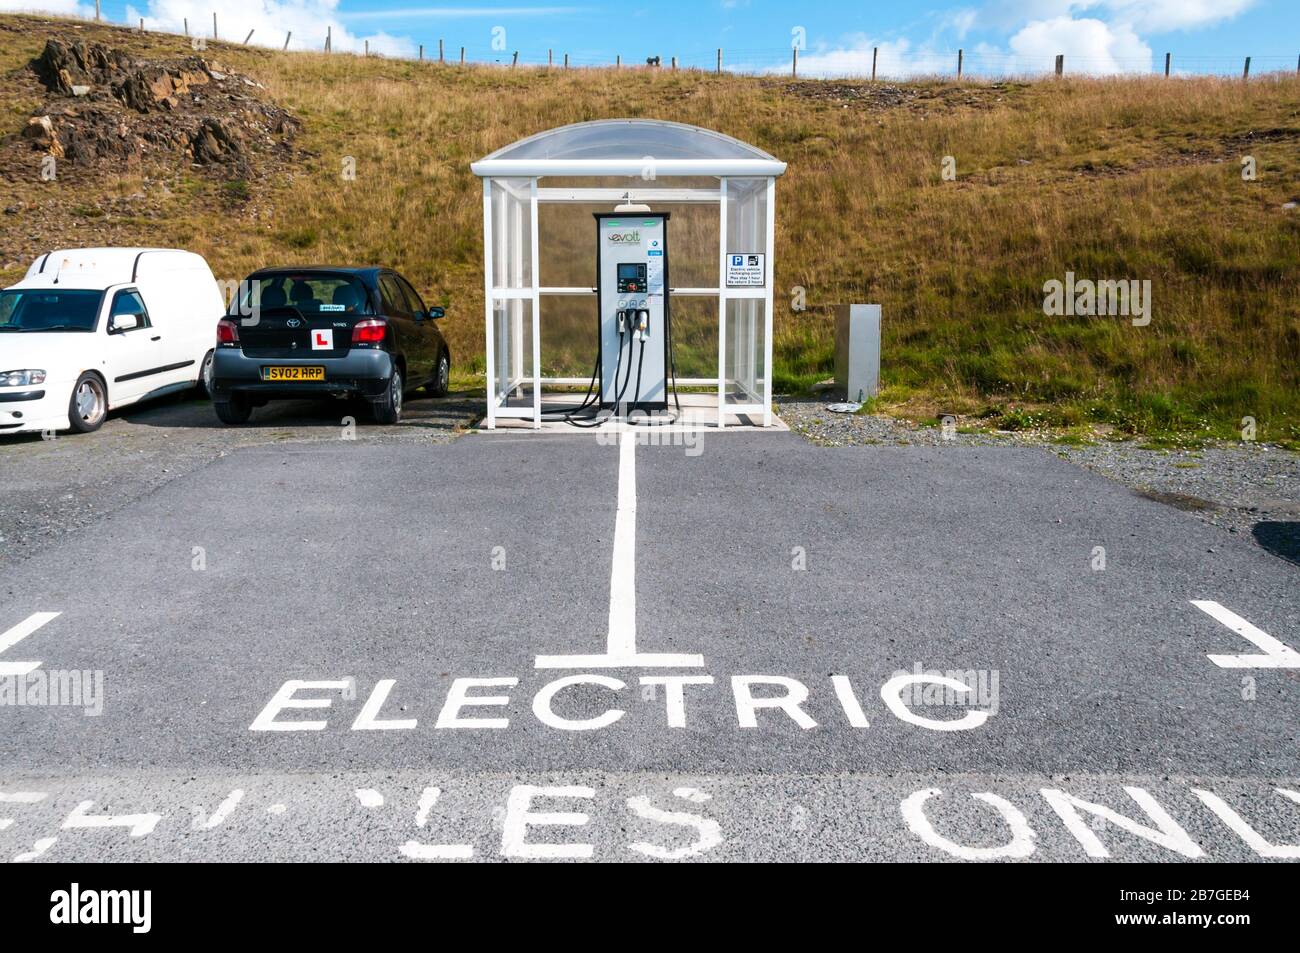 An evolt electric vehicle charging point in a car park in Lerwick on Mainland Shetland. Stock Photo